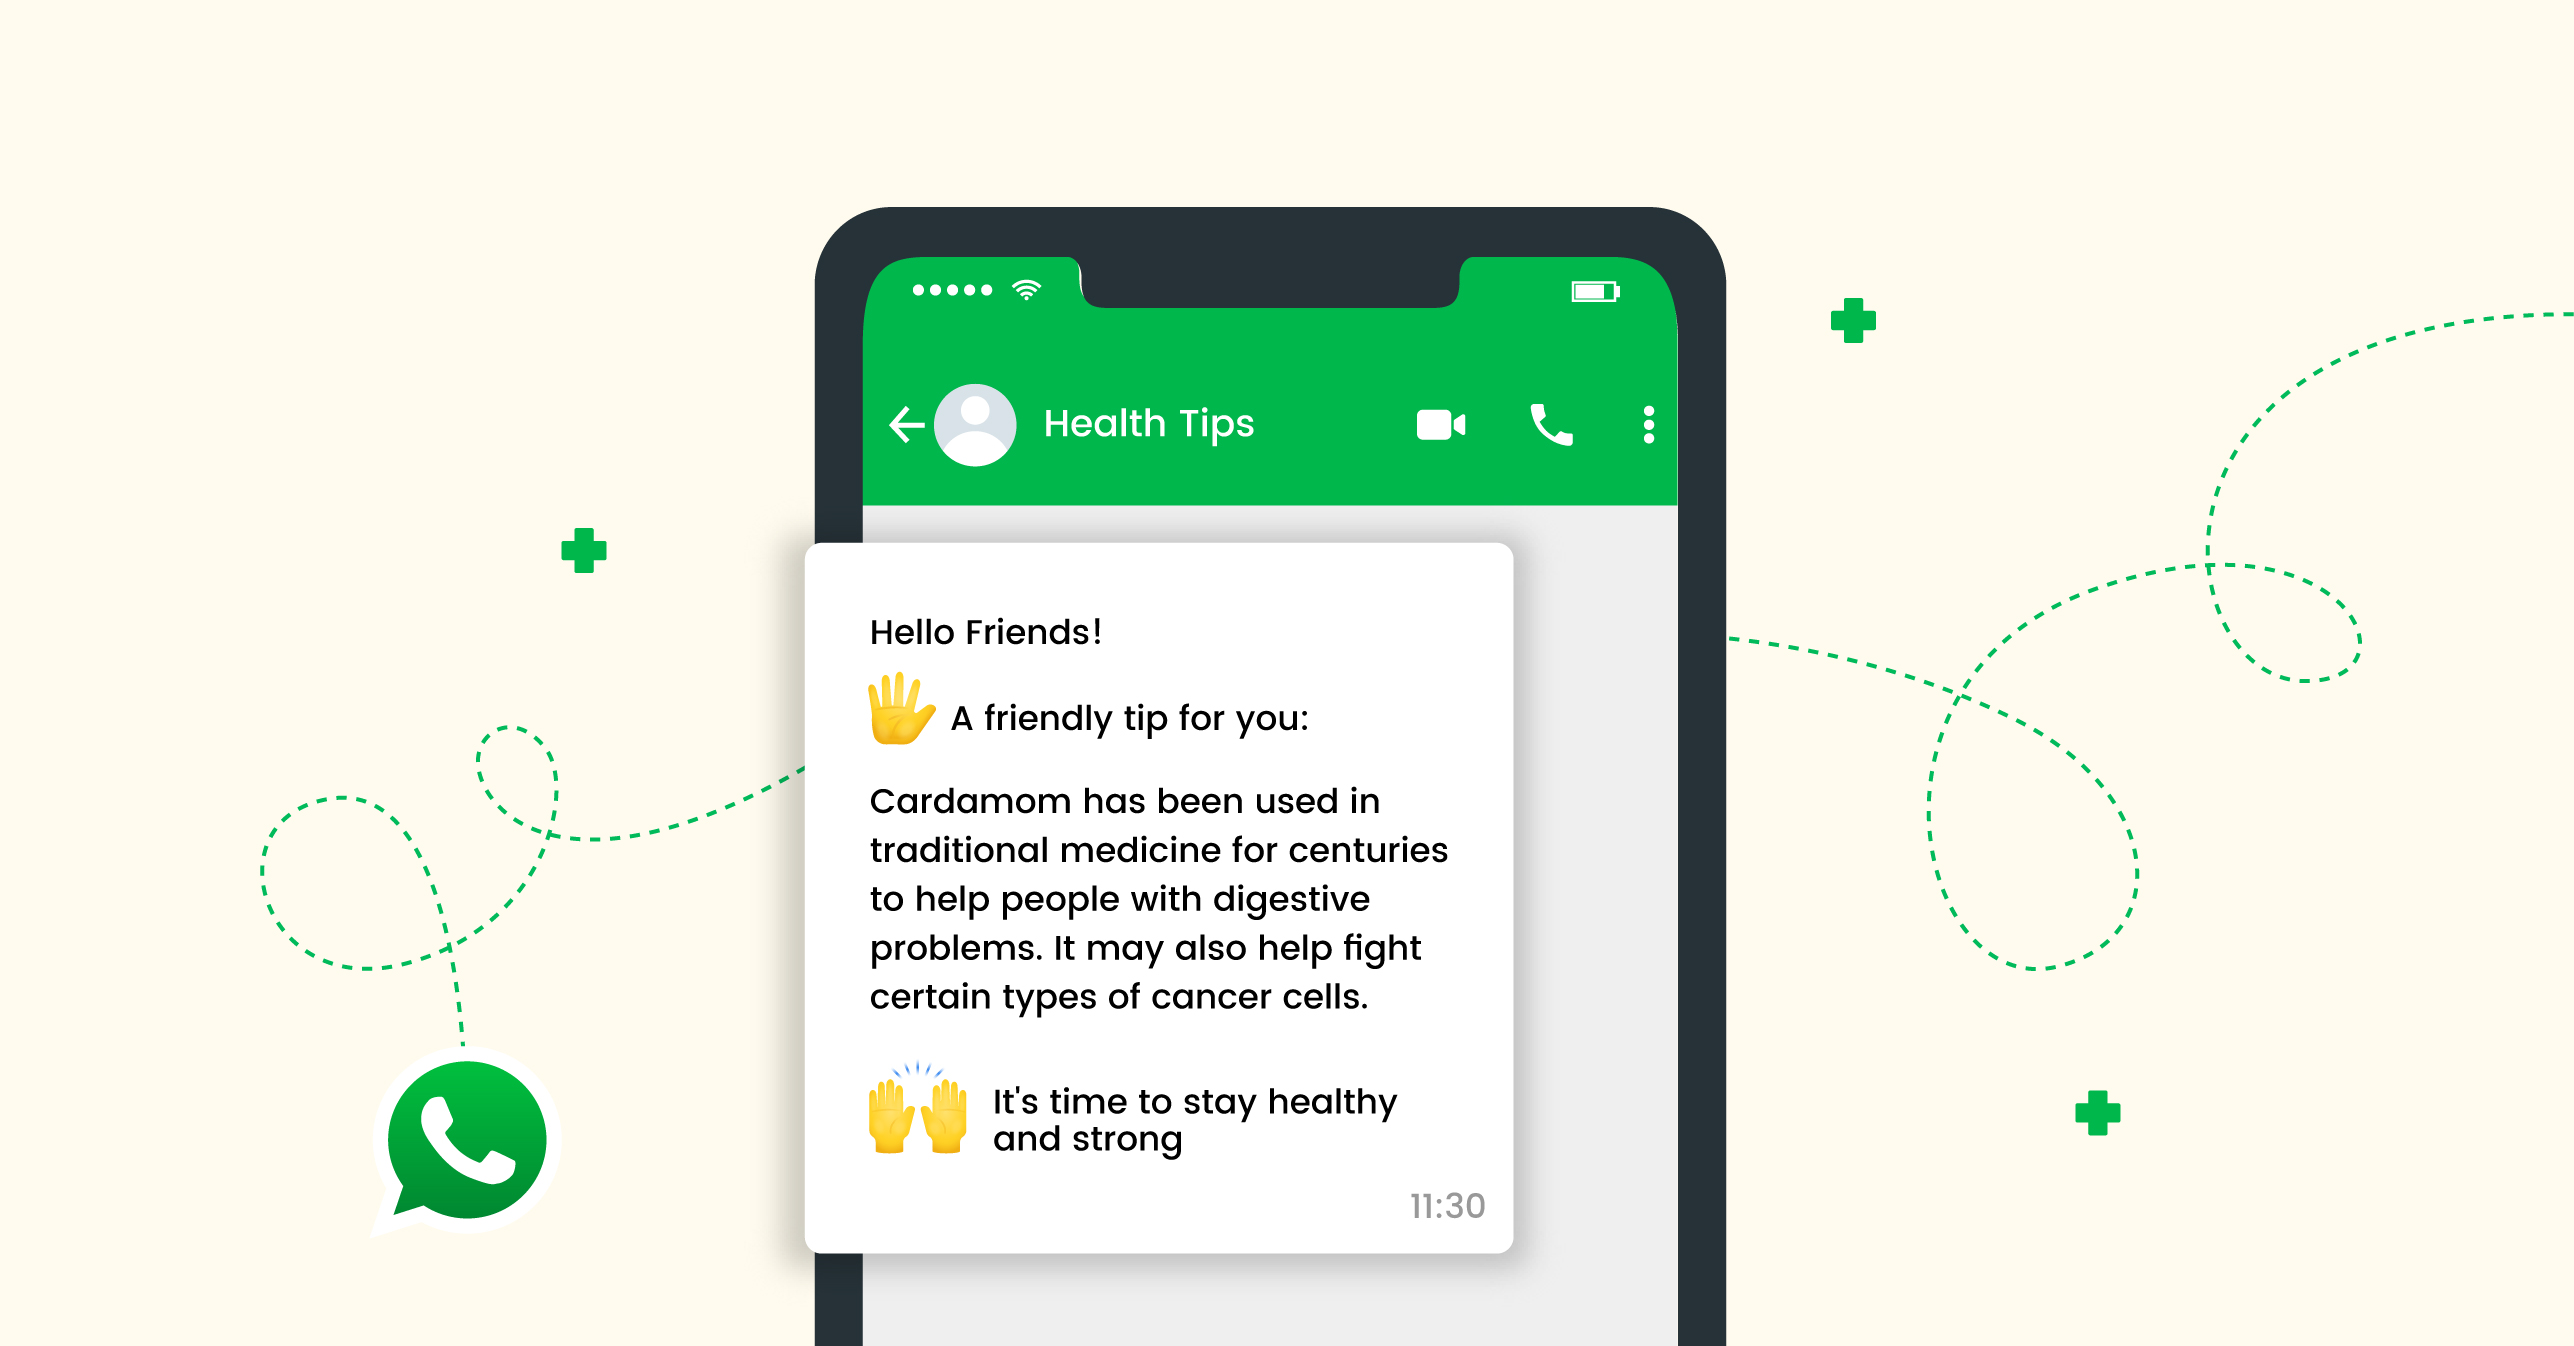 Use Case 2: Health Tips and Advice 